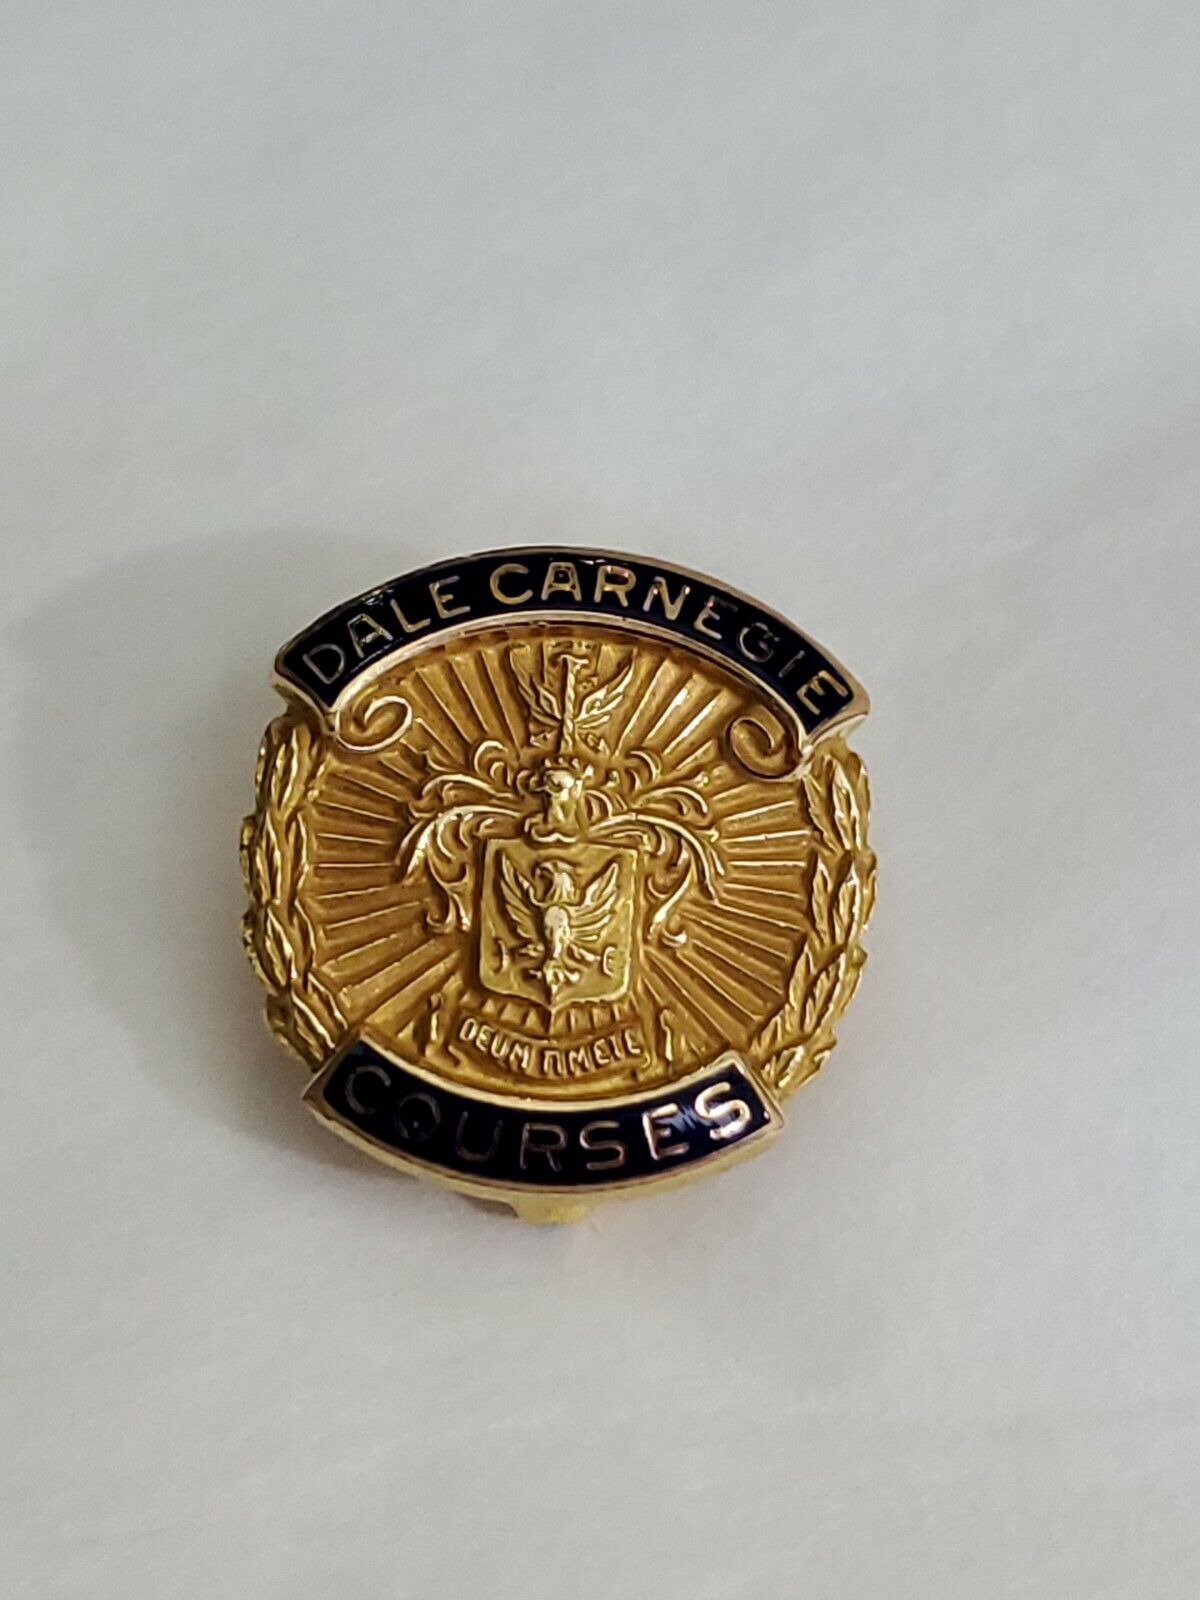 Dale Carnegie Courses Lapel Pin 1/10th 10KGF Gold Success in Business & Life